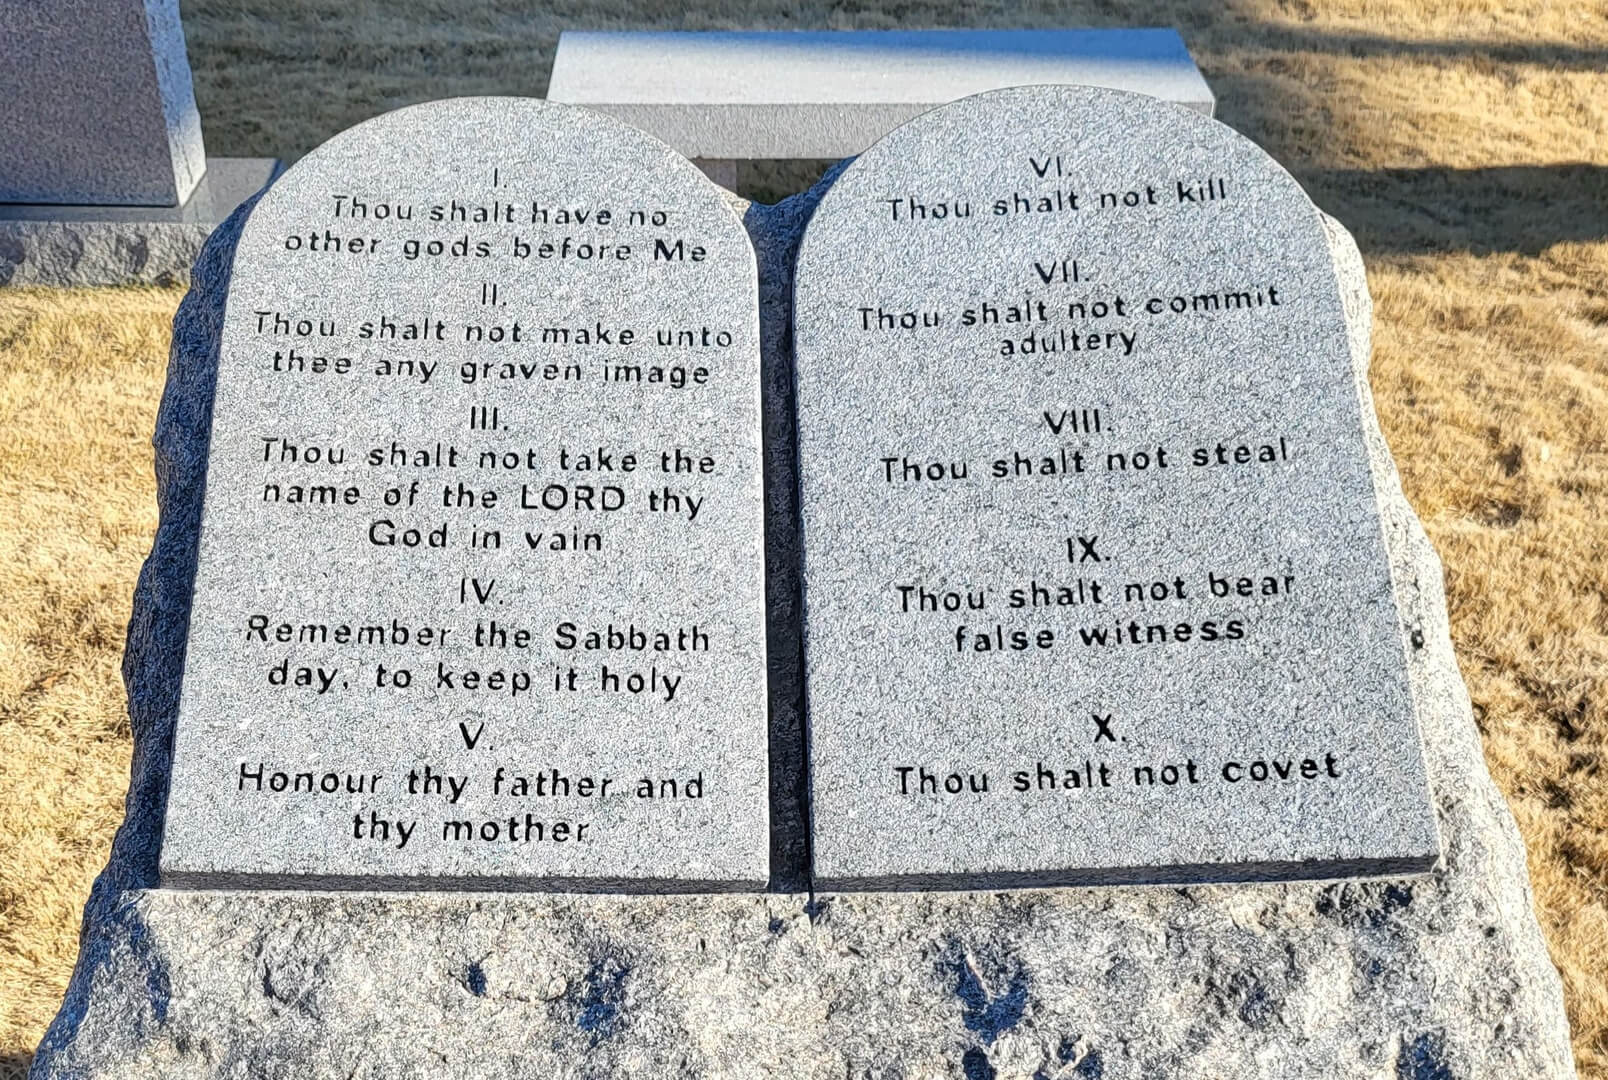 A beautiful quote engraved on the memorial slab